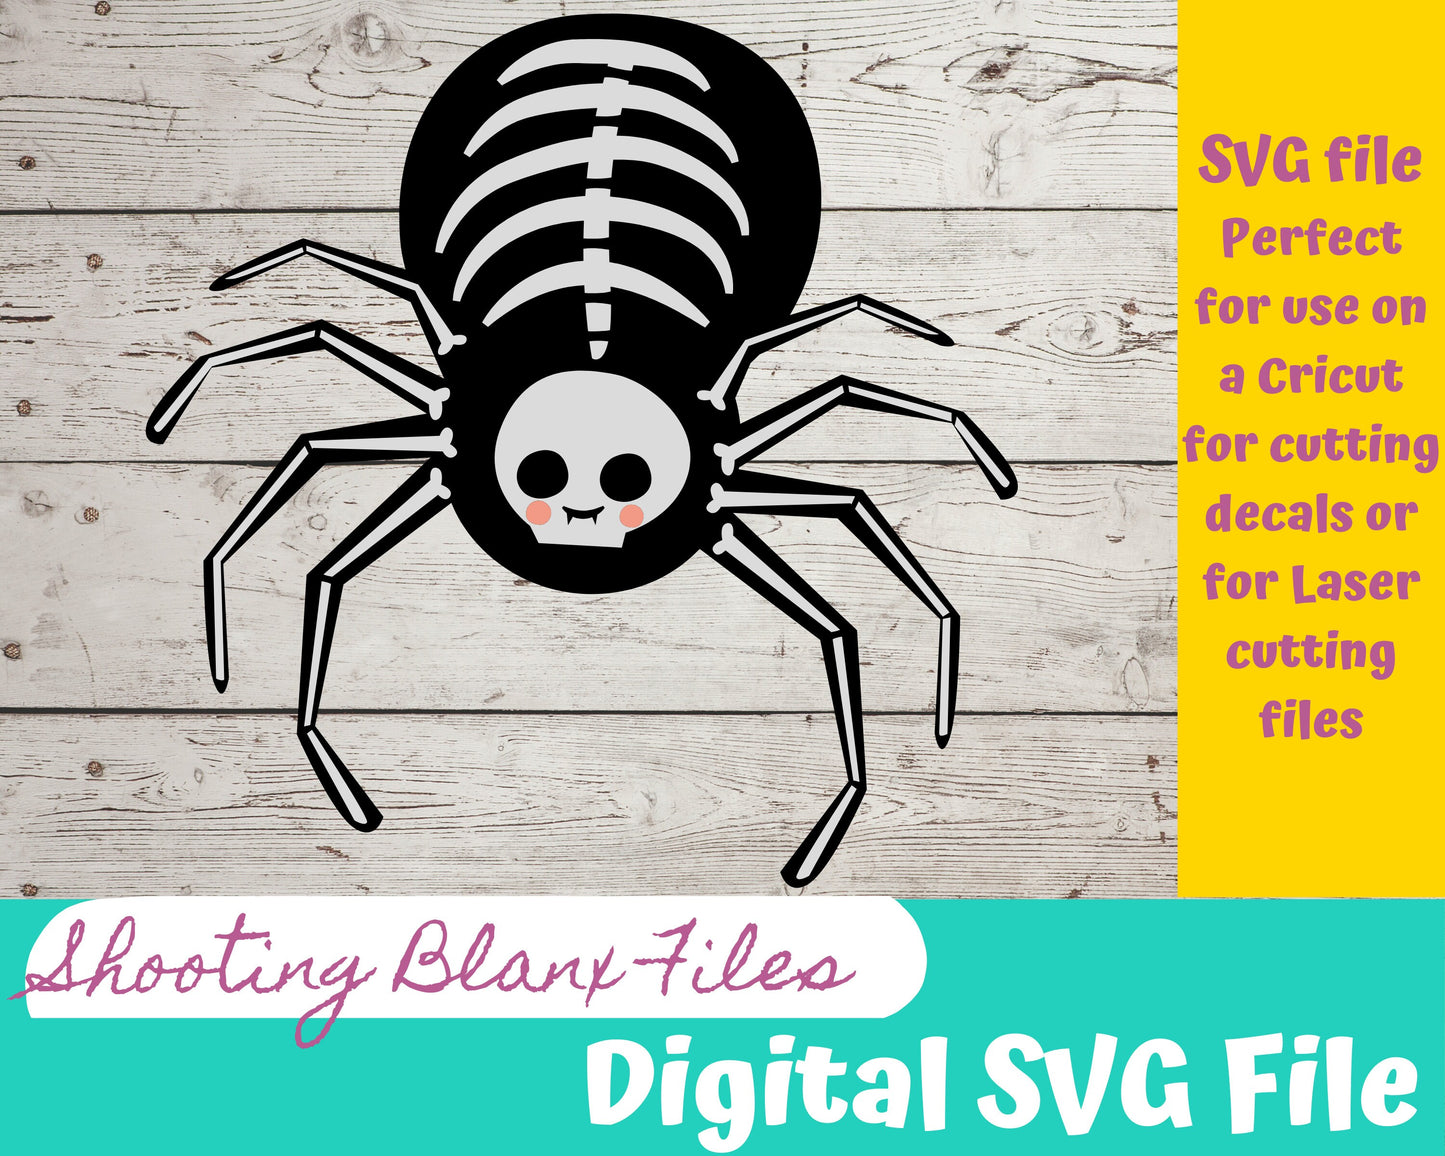 Spider Skeleton SVG file perfect for Cricut, Cameo, or Silhouette also for laser engraving Glowforge, Scary, Halloween, animal